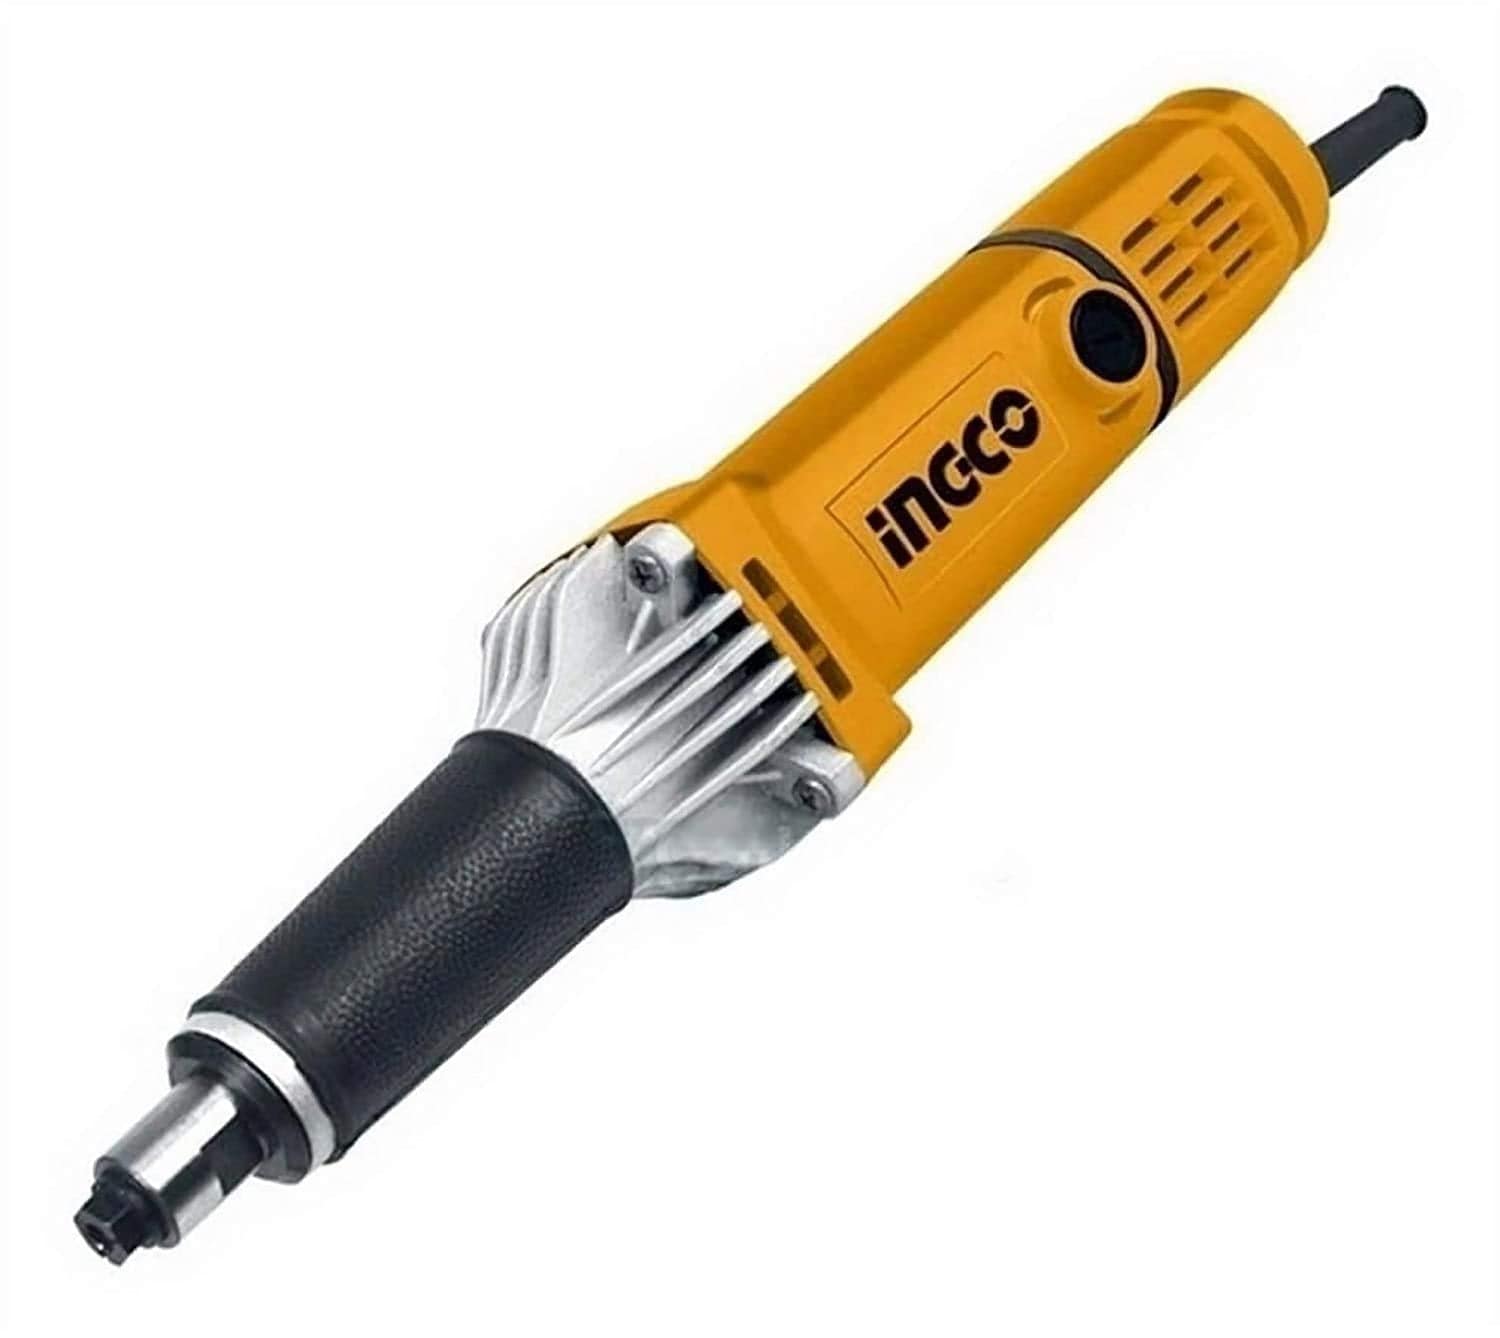 Ingco Die Grinder 400W - PDG4003 - Buy Online in Accra, Ghana at Supply Master Rotary & Oscillating Tool Buy Tools hardware Building materials